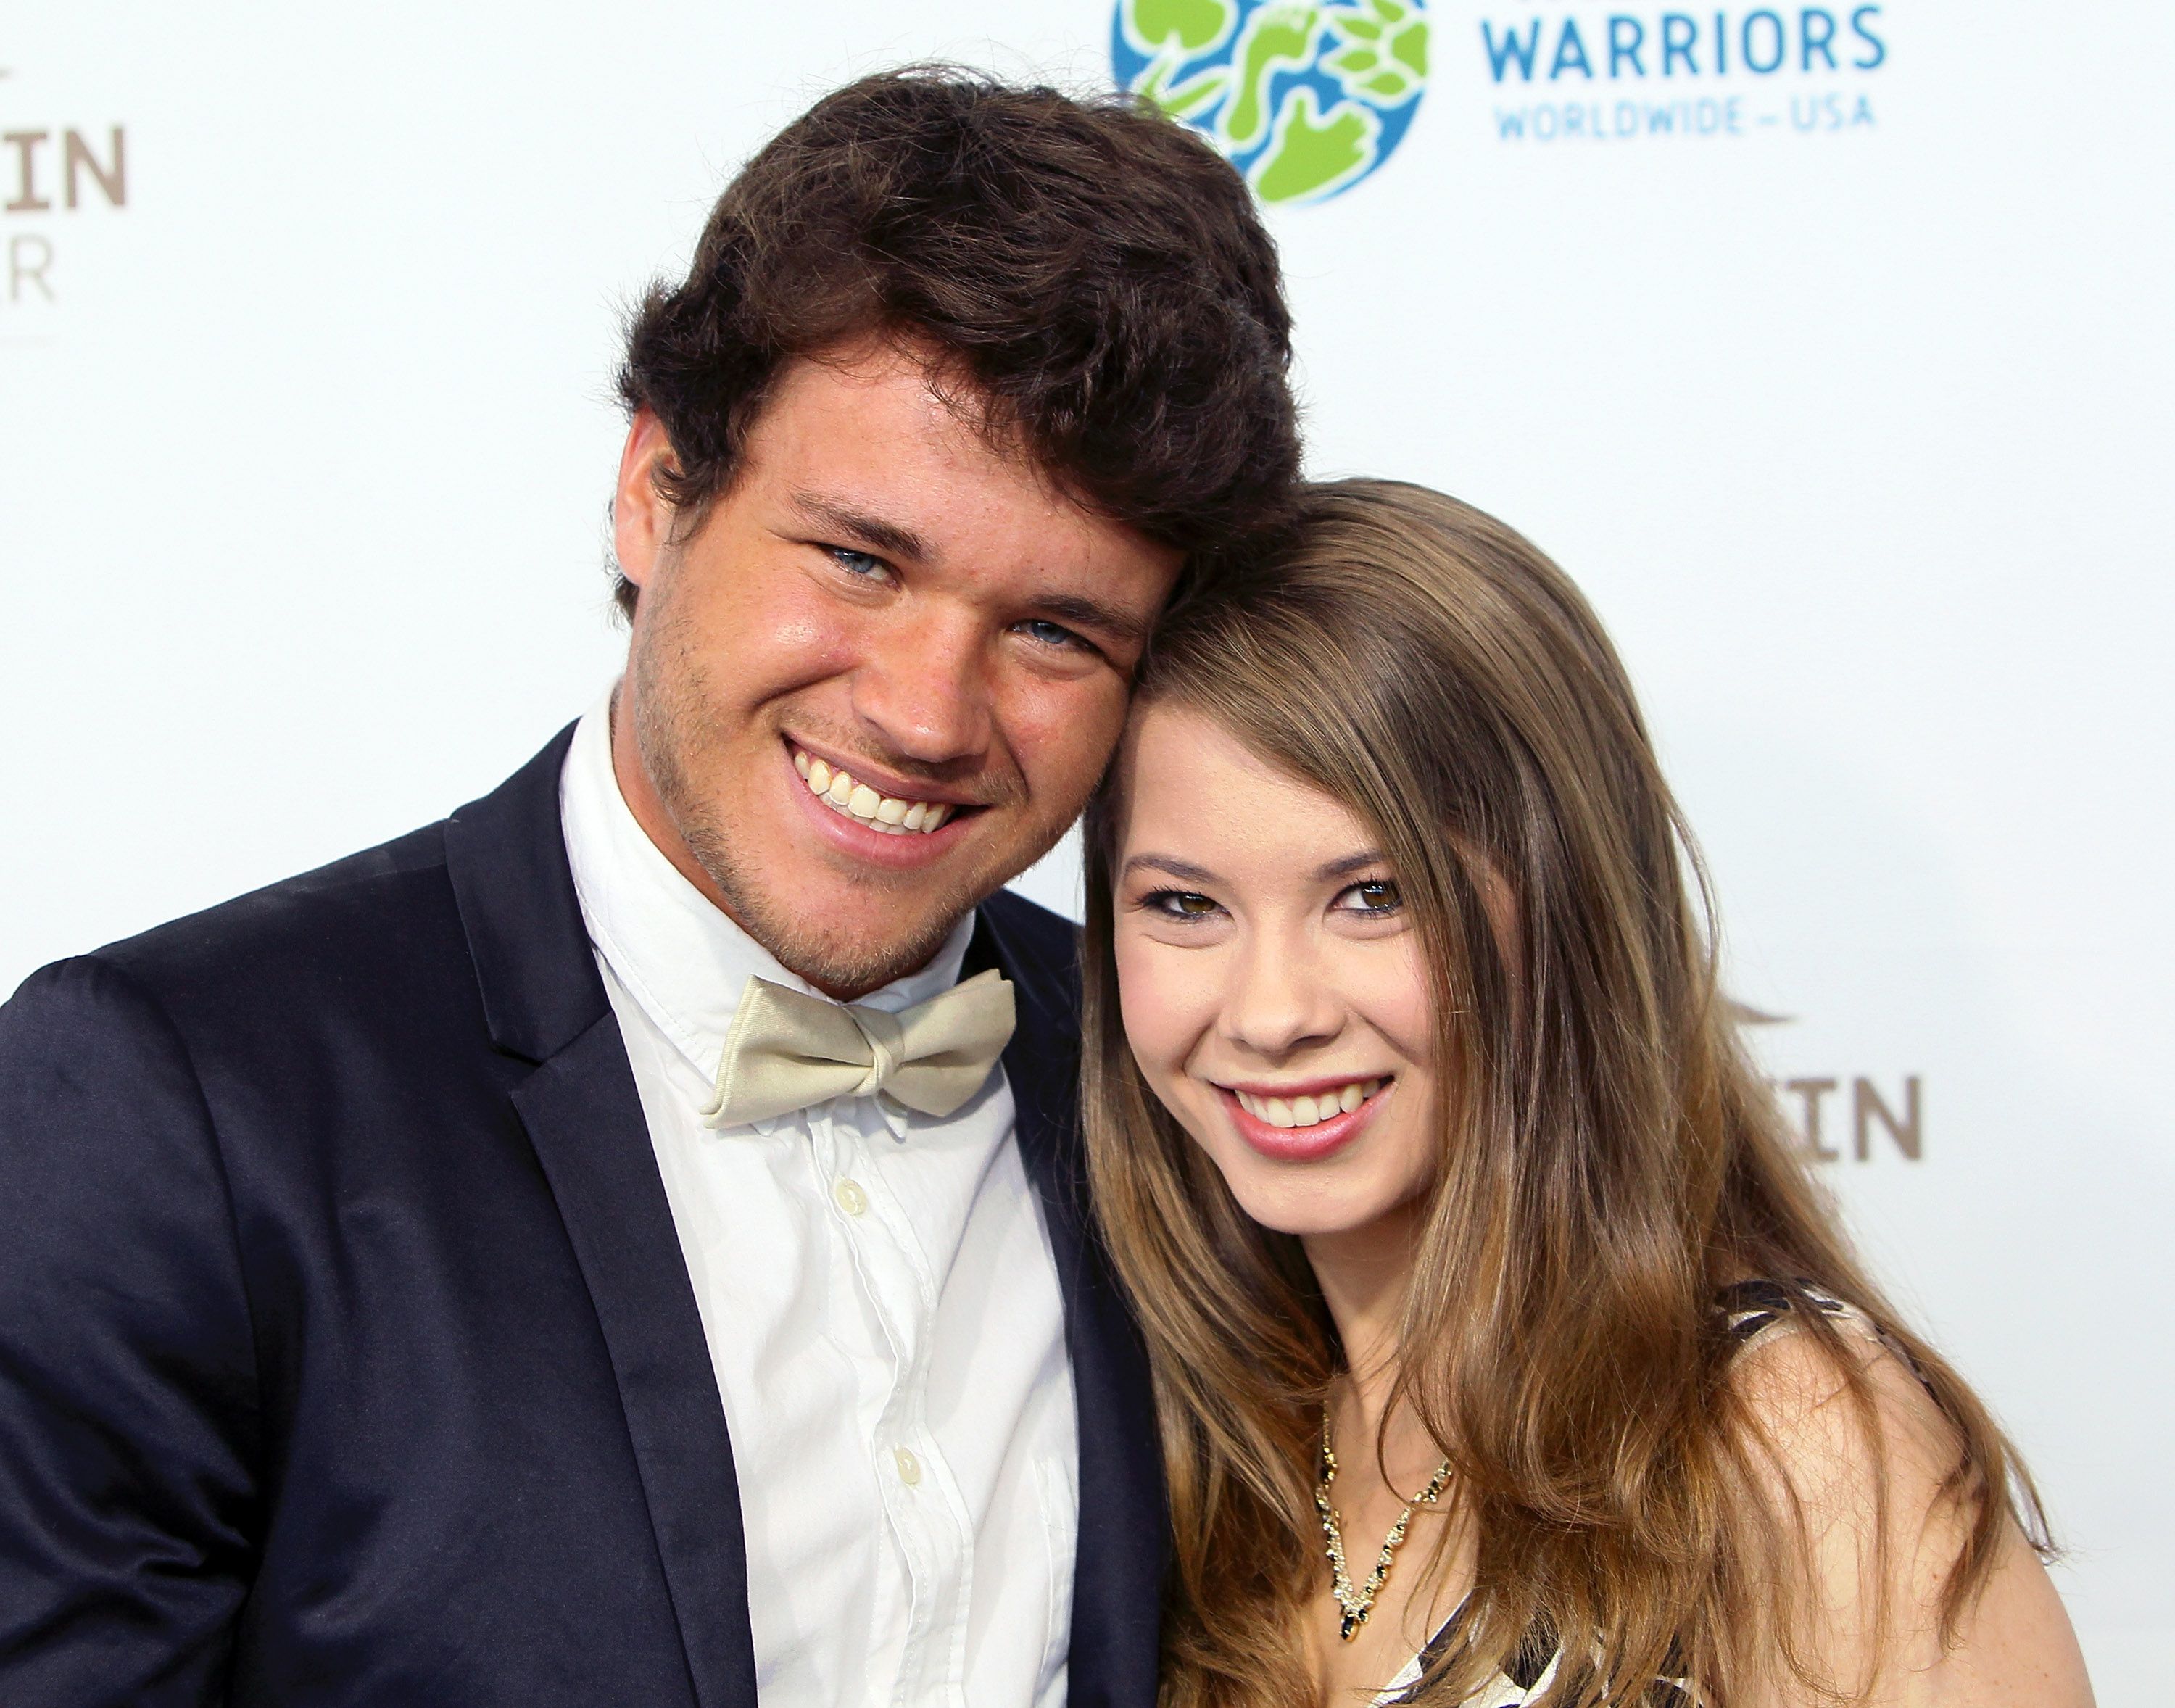 Bindi Irwin and Chandler Powell at the Steve Irwin Gala Dinner at JW Marriott Los Angeles in Los Angeles, California | Photo: David Livingston/Getty Images